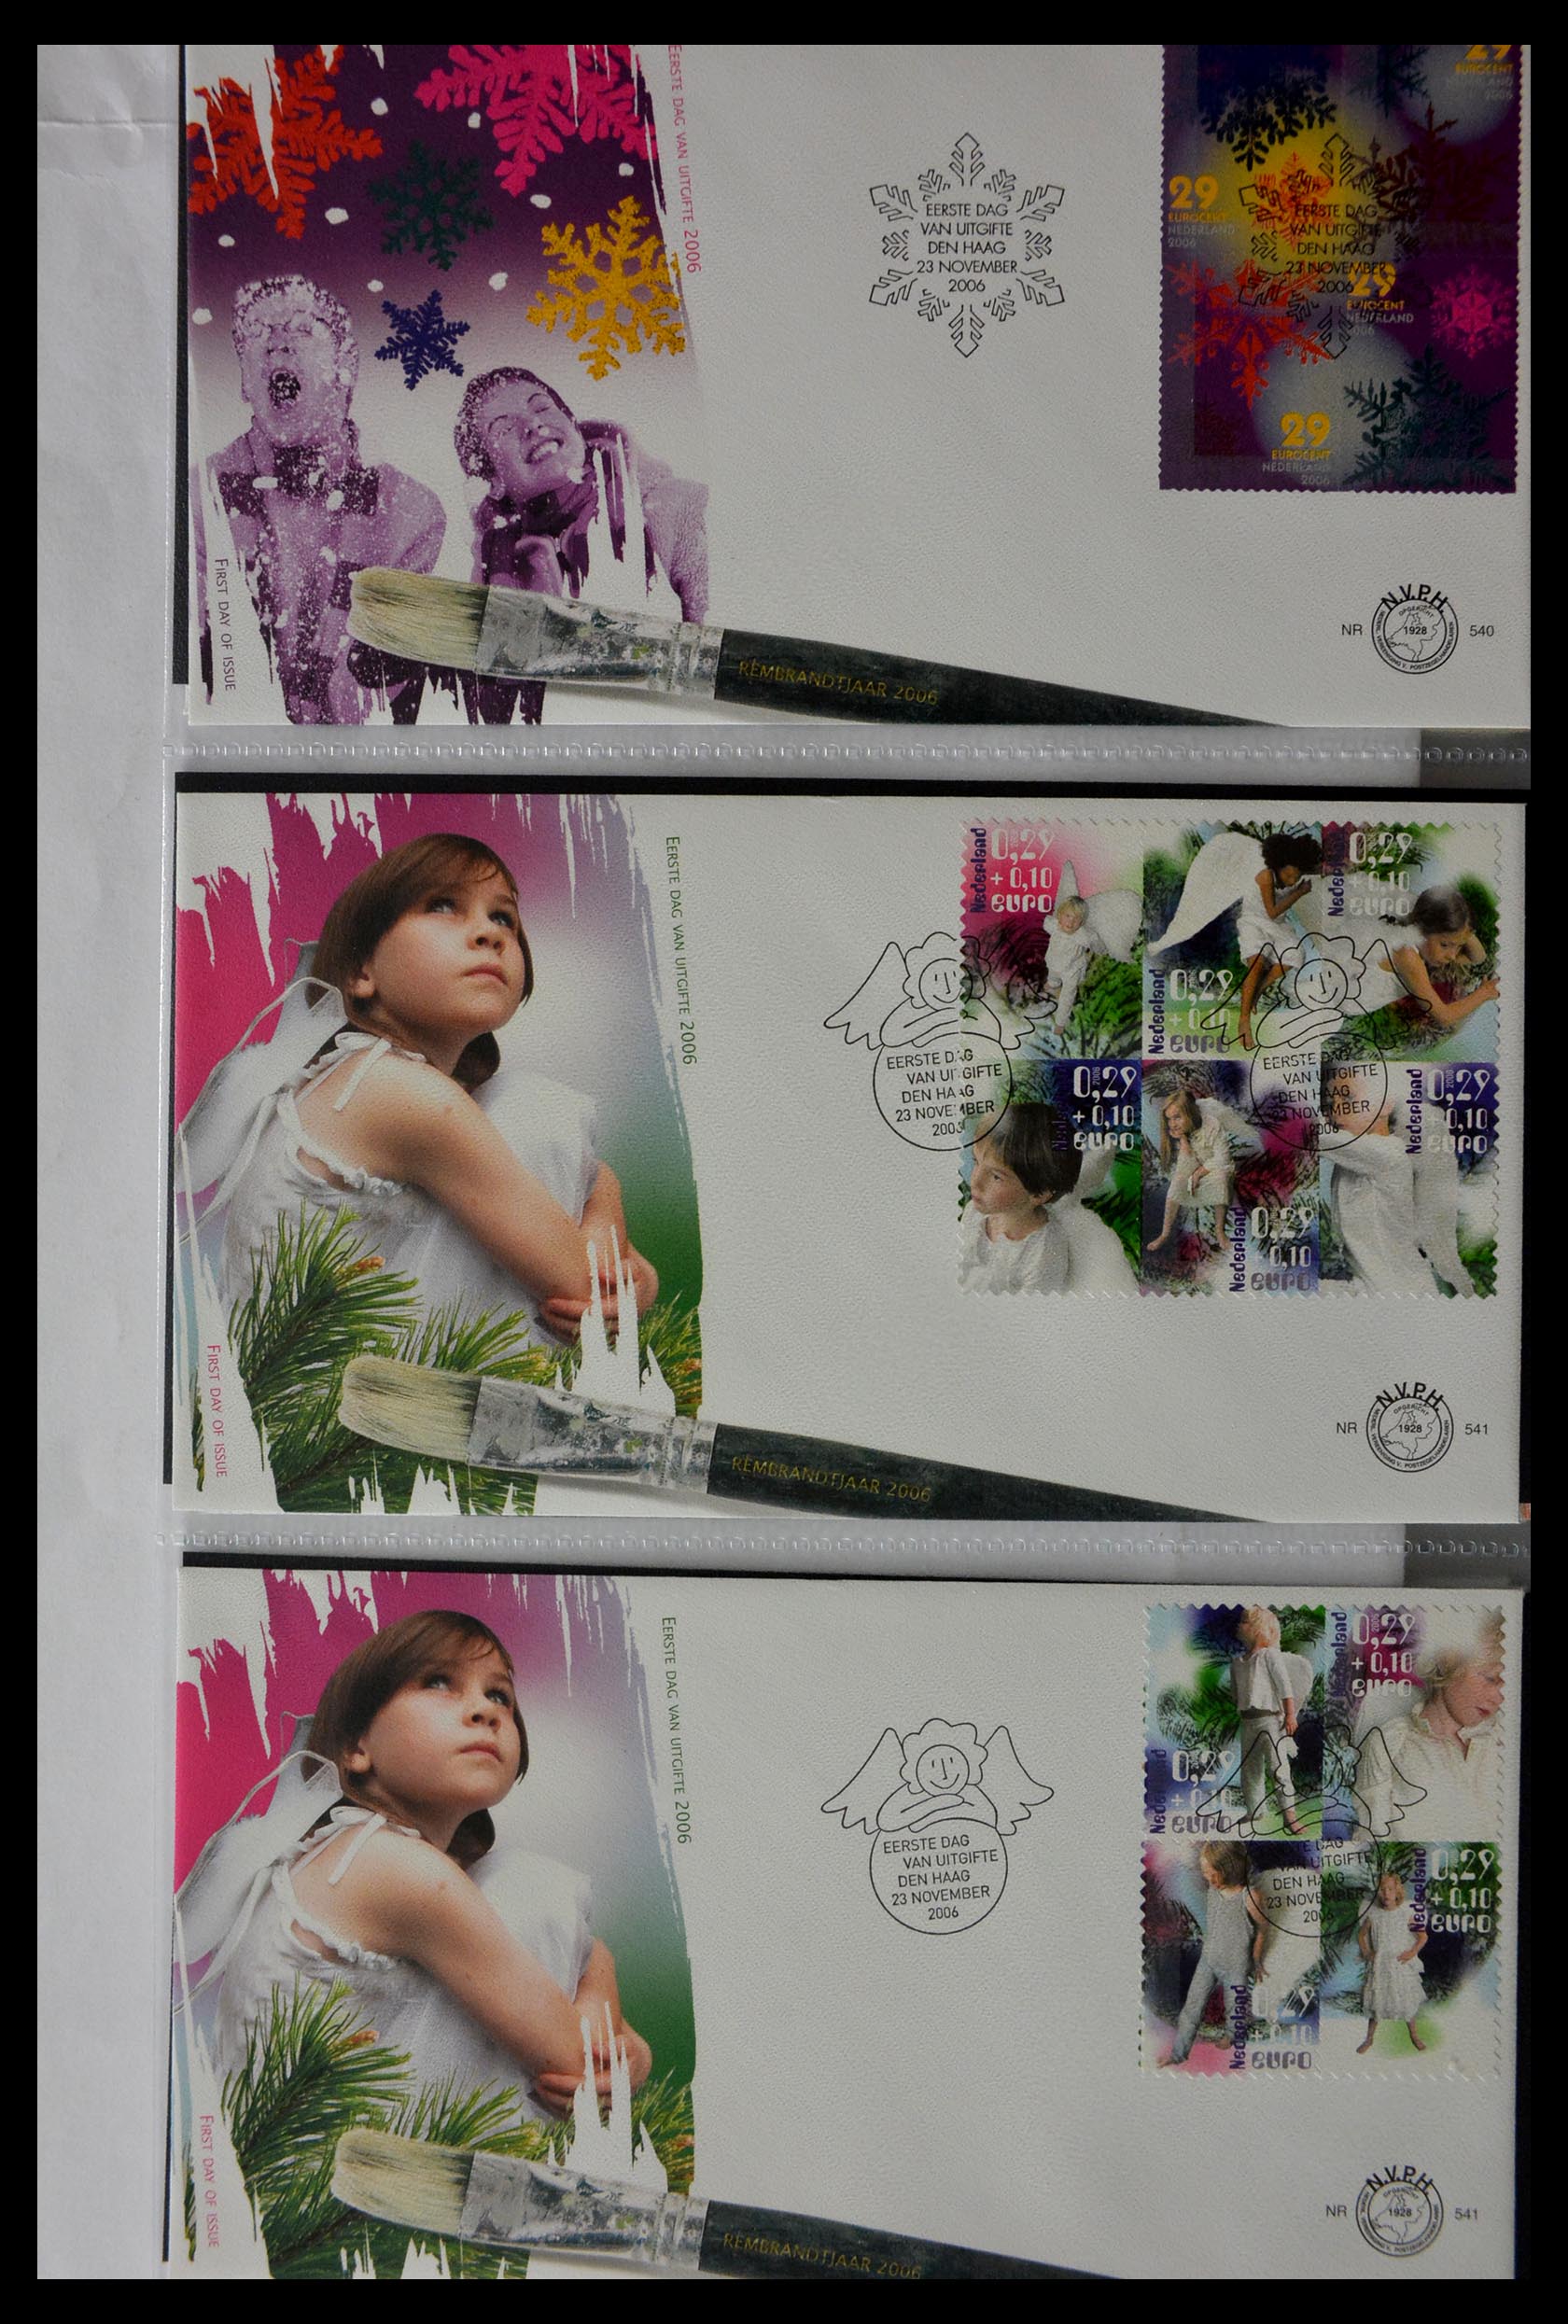 28897 050 - 28897 Netherlands 2001-2013 FDC's.